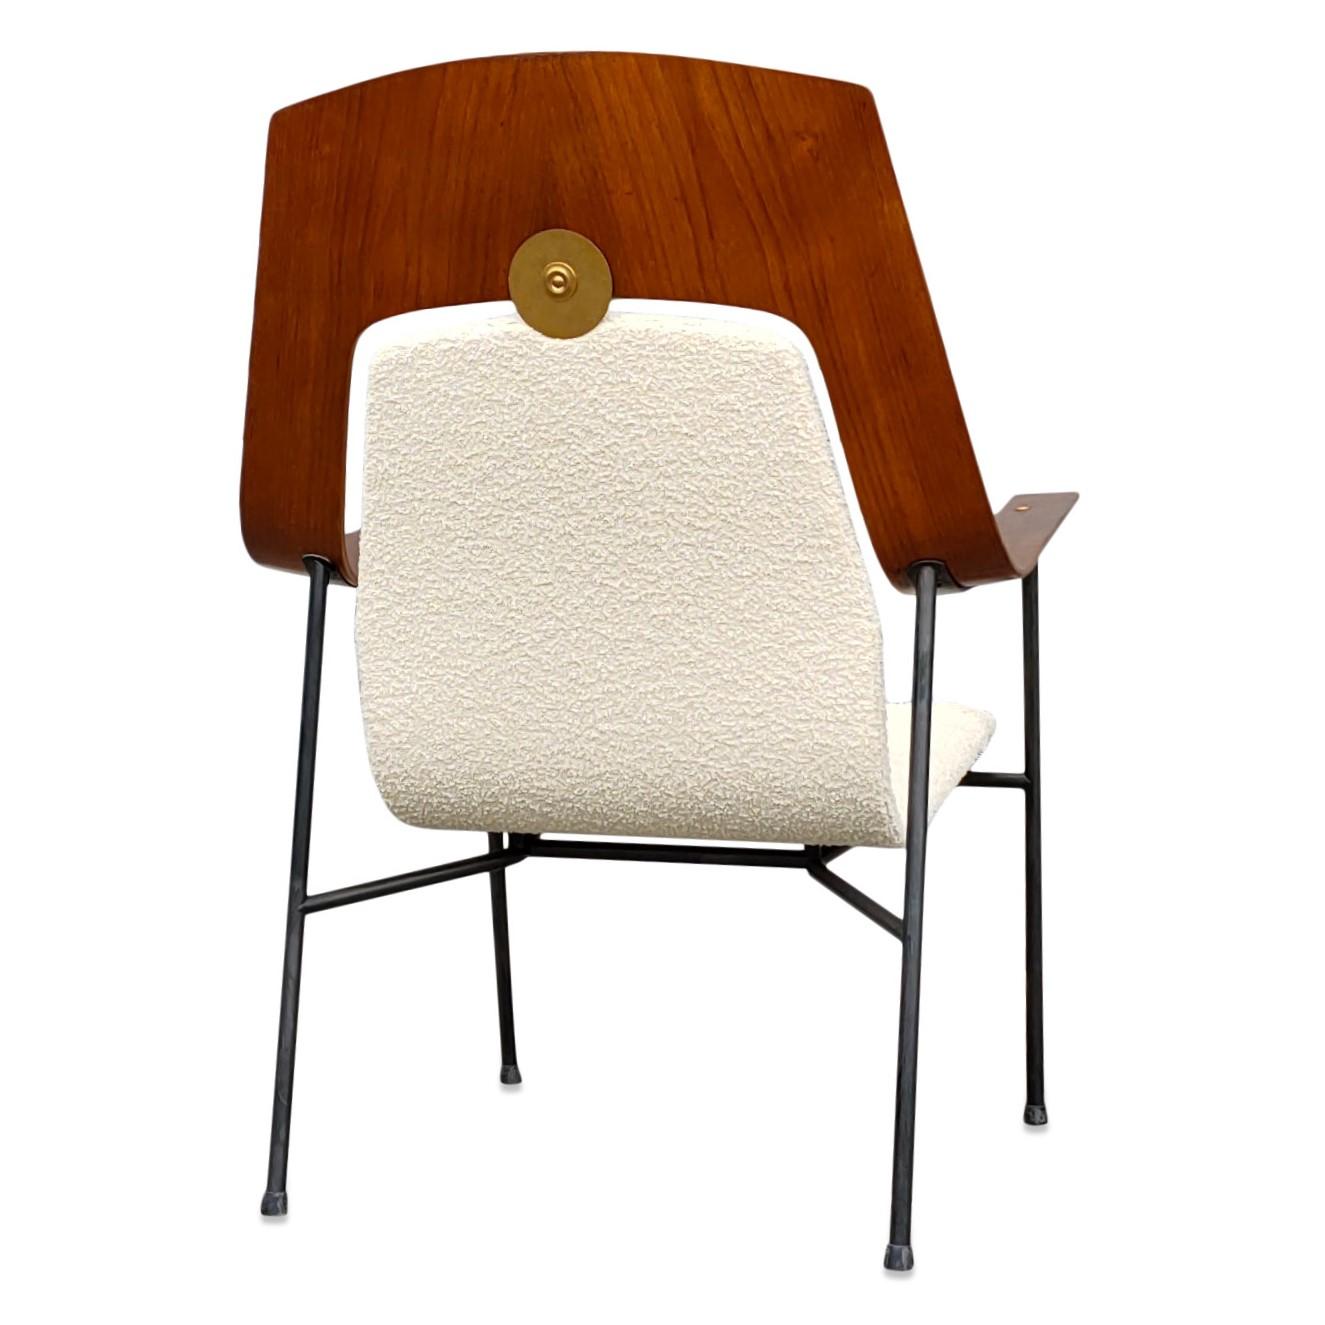 One of a kind teak plywood armchair
brass accents
enameled steel structure
fresh crème white bouclé upholstery
This item will be shipped disassembled for safer shipping (seat, feet and backrest disassembled in the same box)
This item will ship